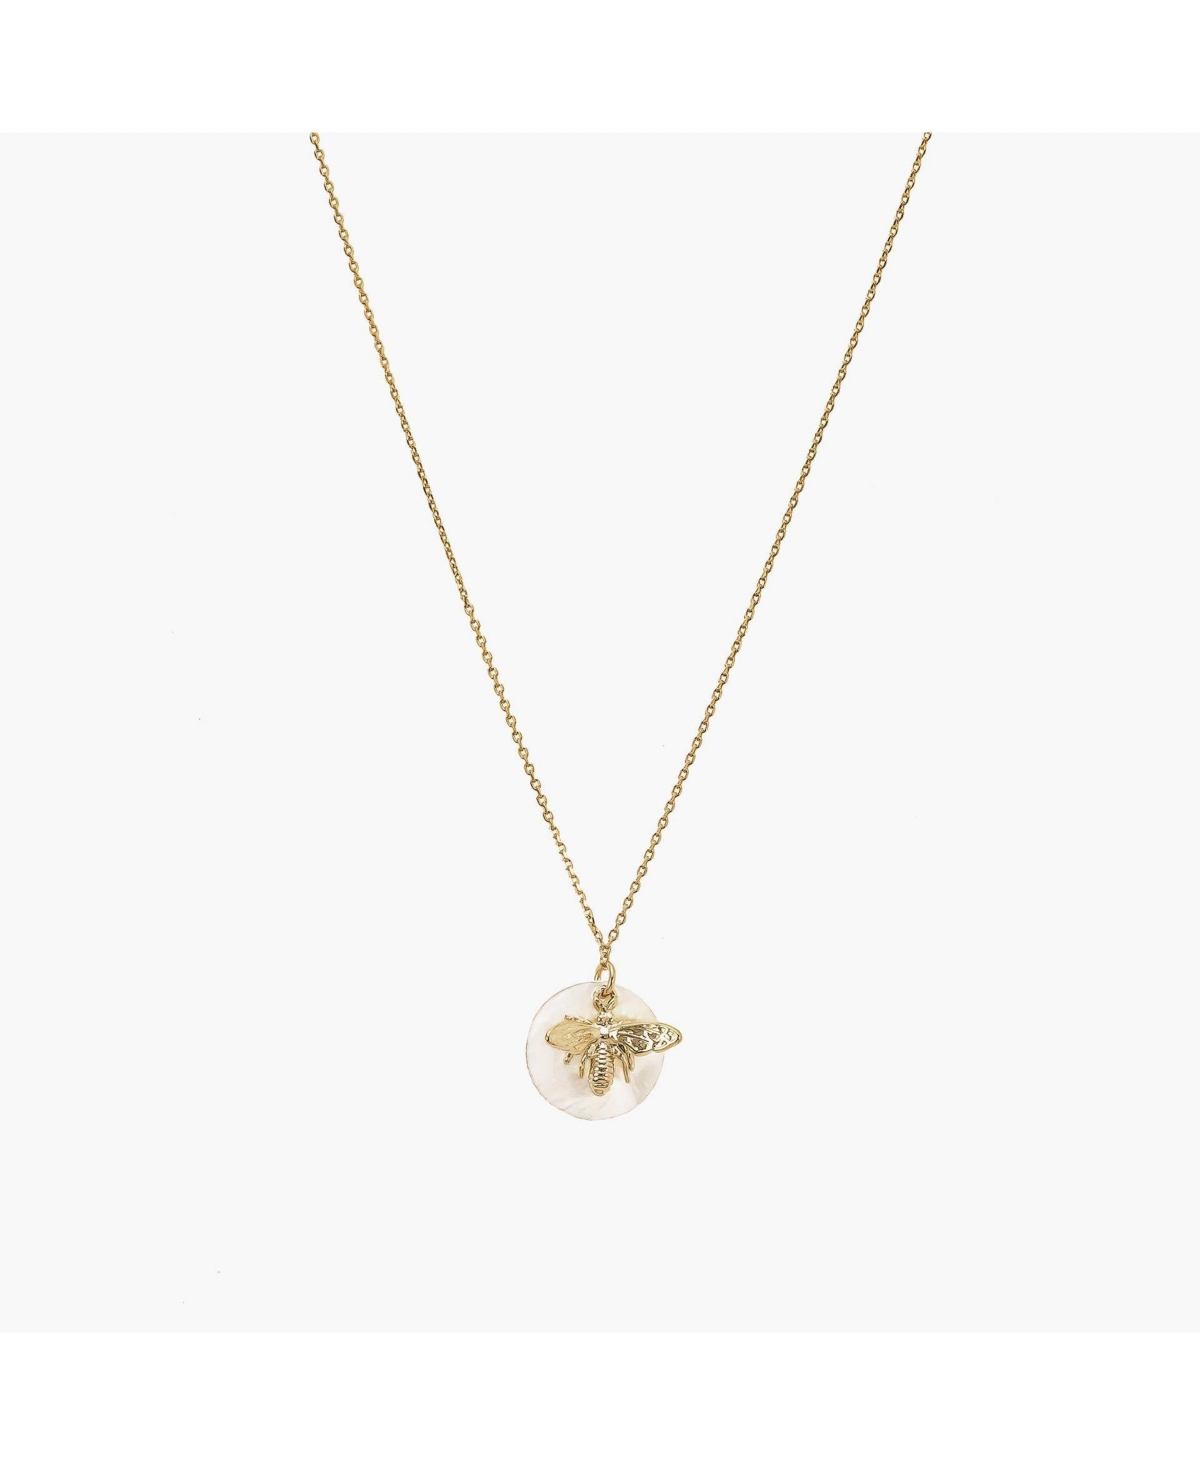 Bee Cultured Pearl Necklace - Yellow gold